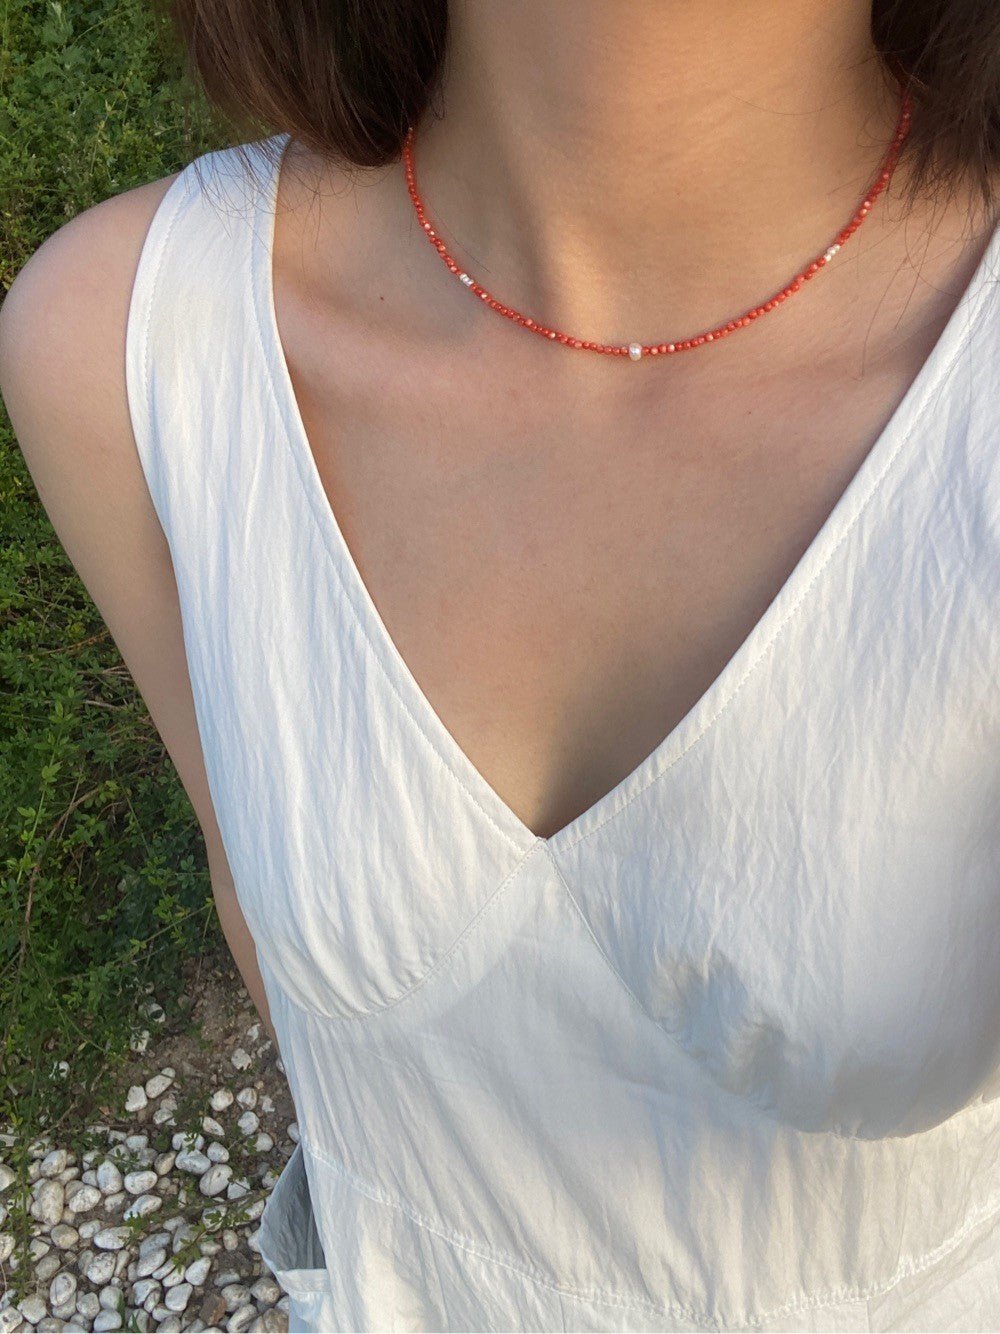 Red Shell Beaded Pearl Necklace